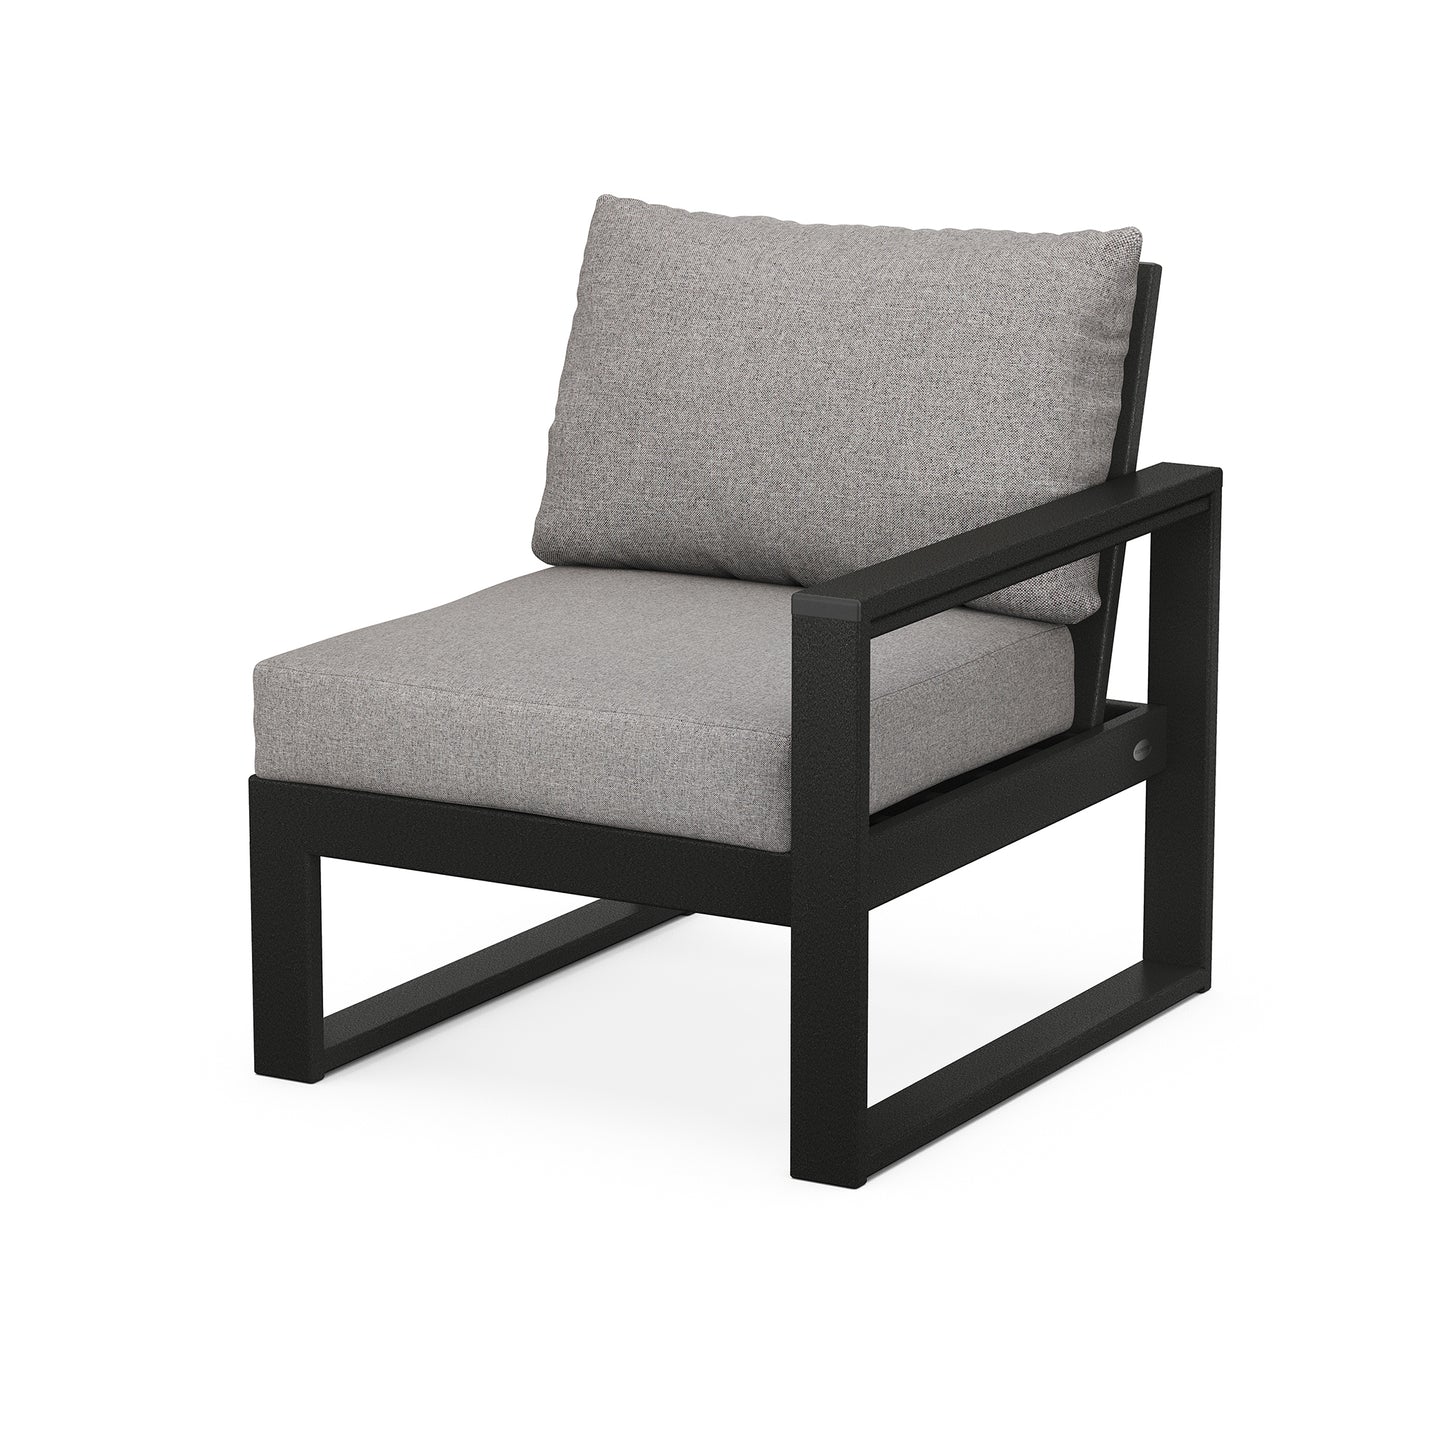 A modern outdoor chair with a black frame and light gray cushions, featuring a minimalist design. This POLYWOOD EDGE Modular Right Arm Chair is isolated on a white background.